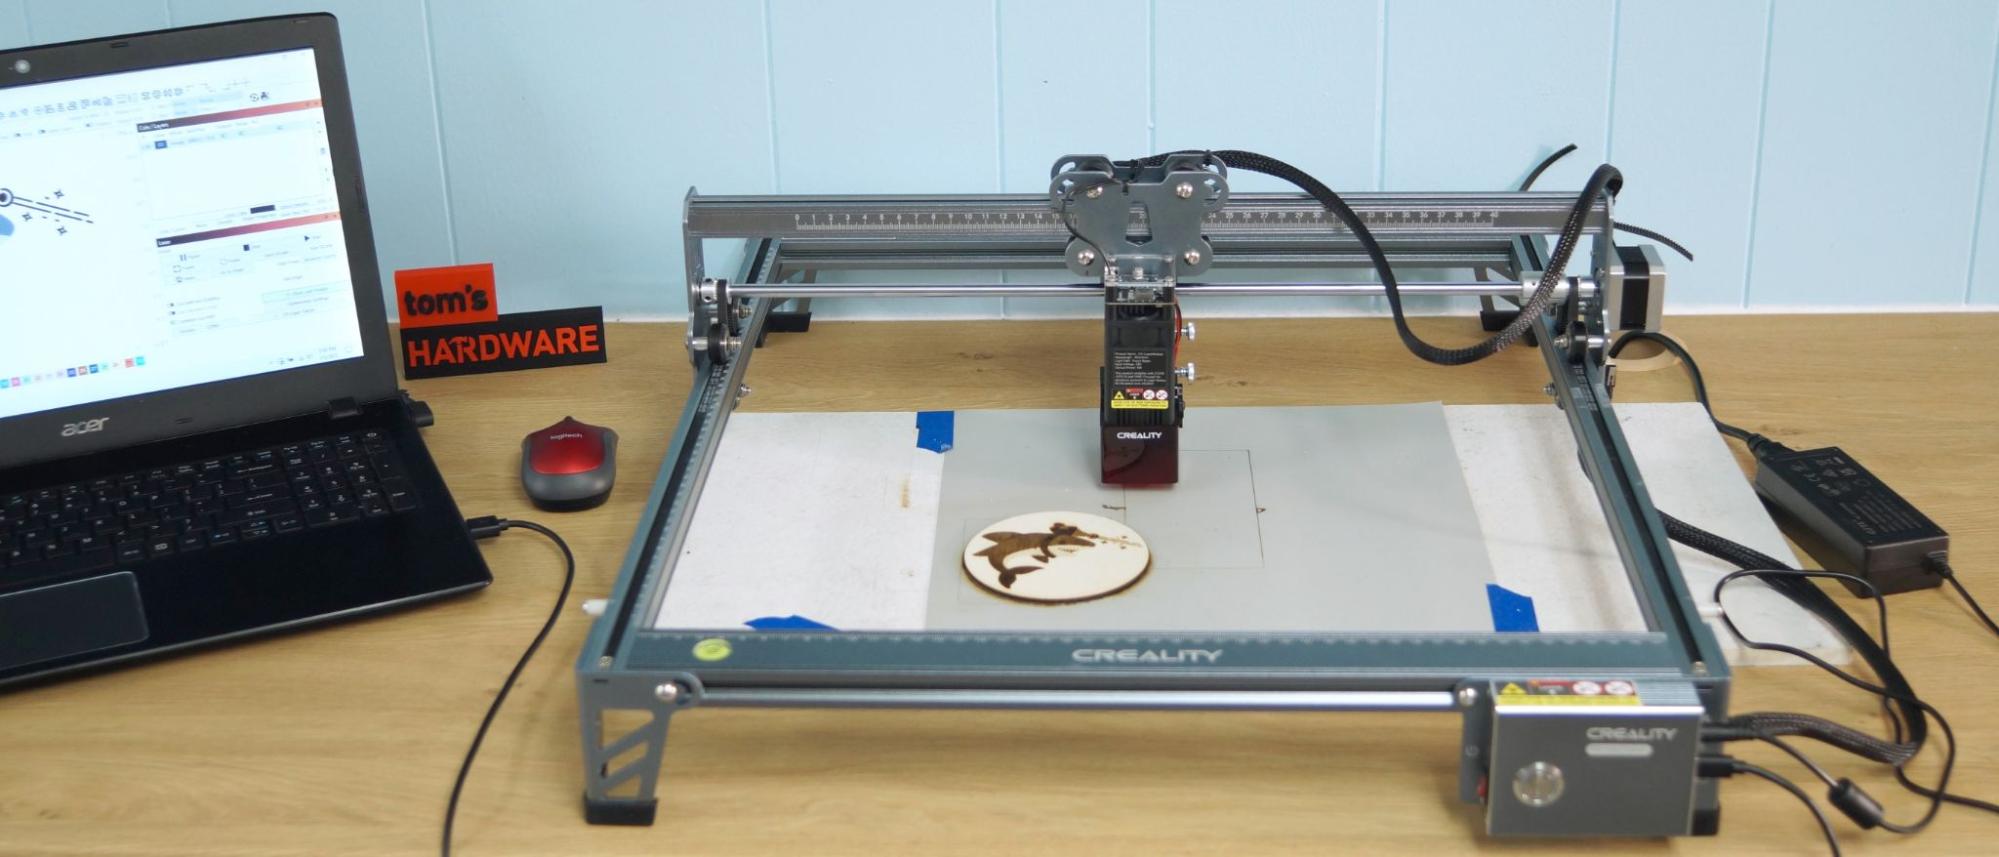 Creality Falcon 2 40W Laser Engraver Strong Cutting CNC Cutter